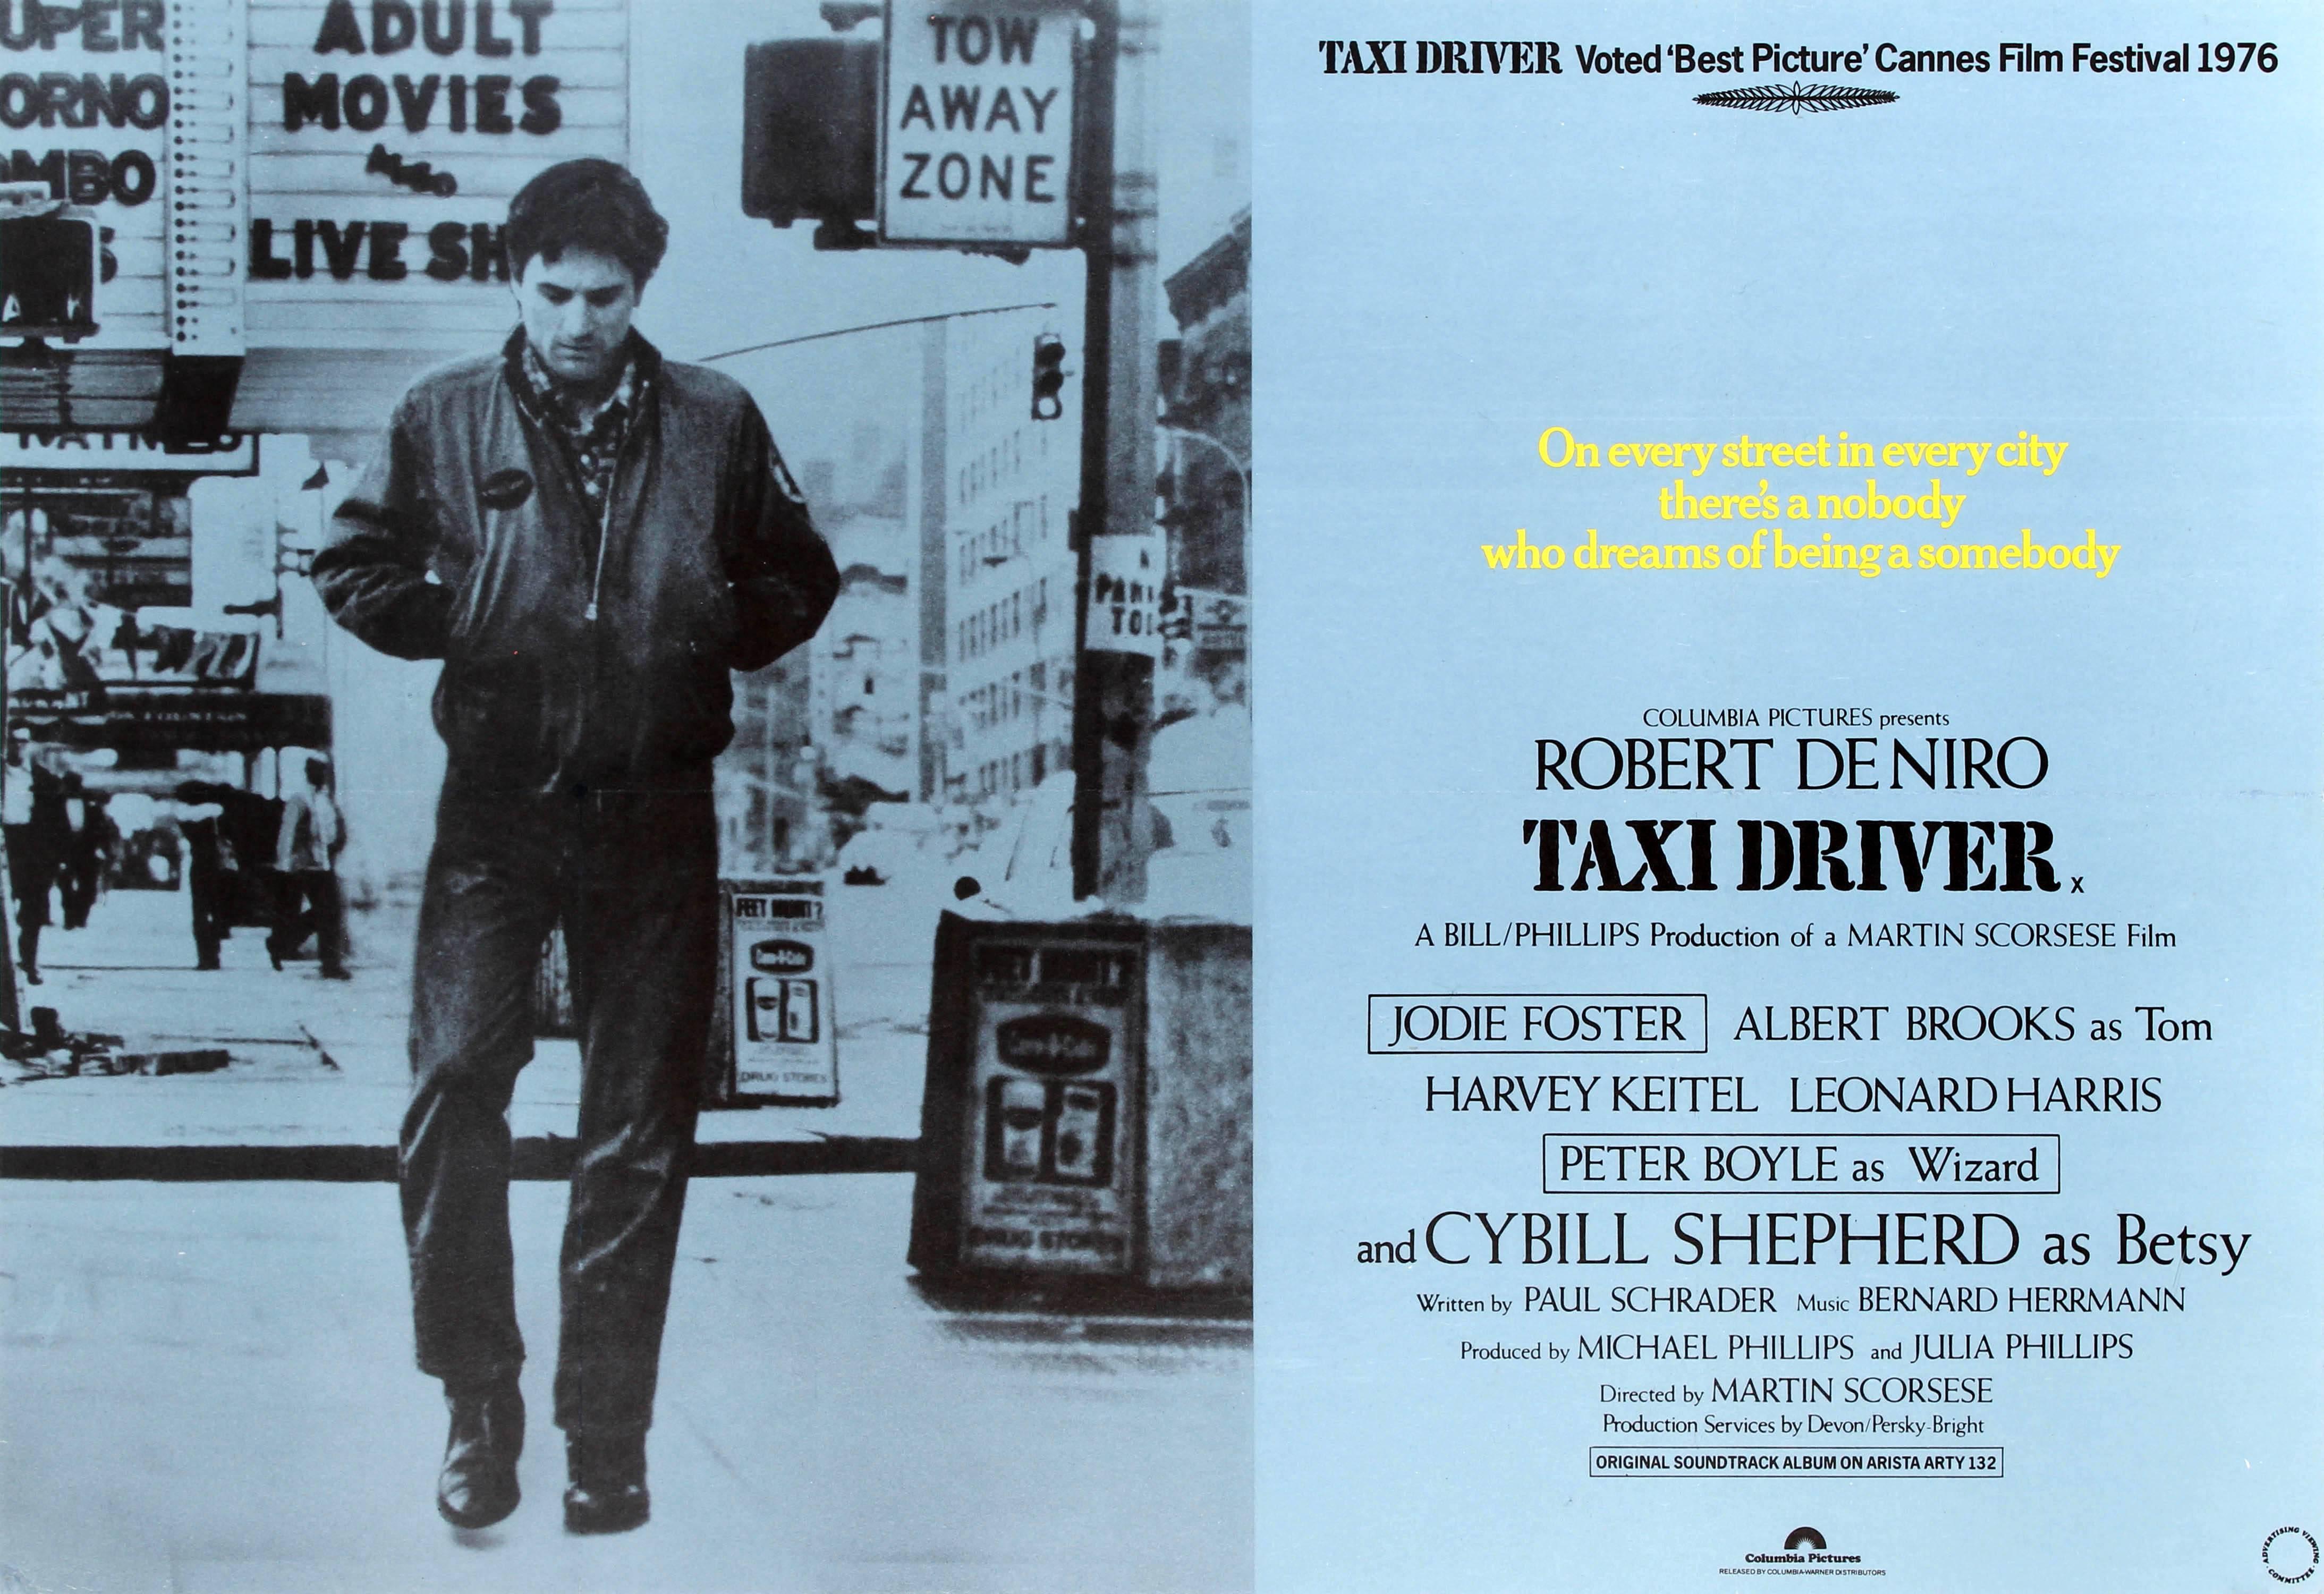 Unknown Print - Original Vintage Movie Poster For The Film Taxi Driver Starring Robert De Niro